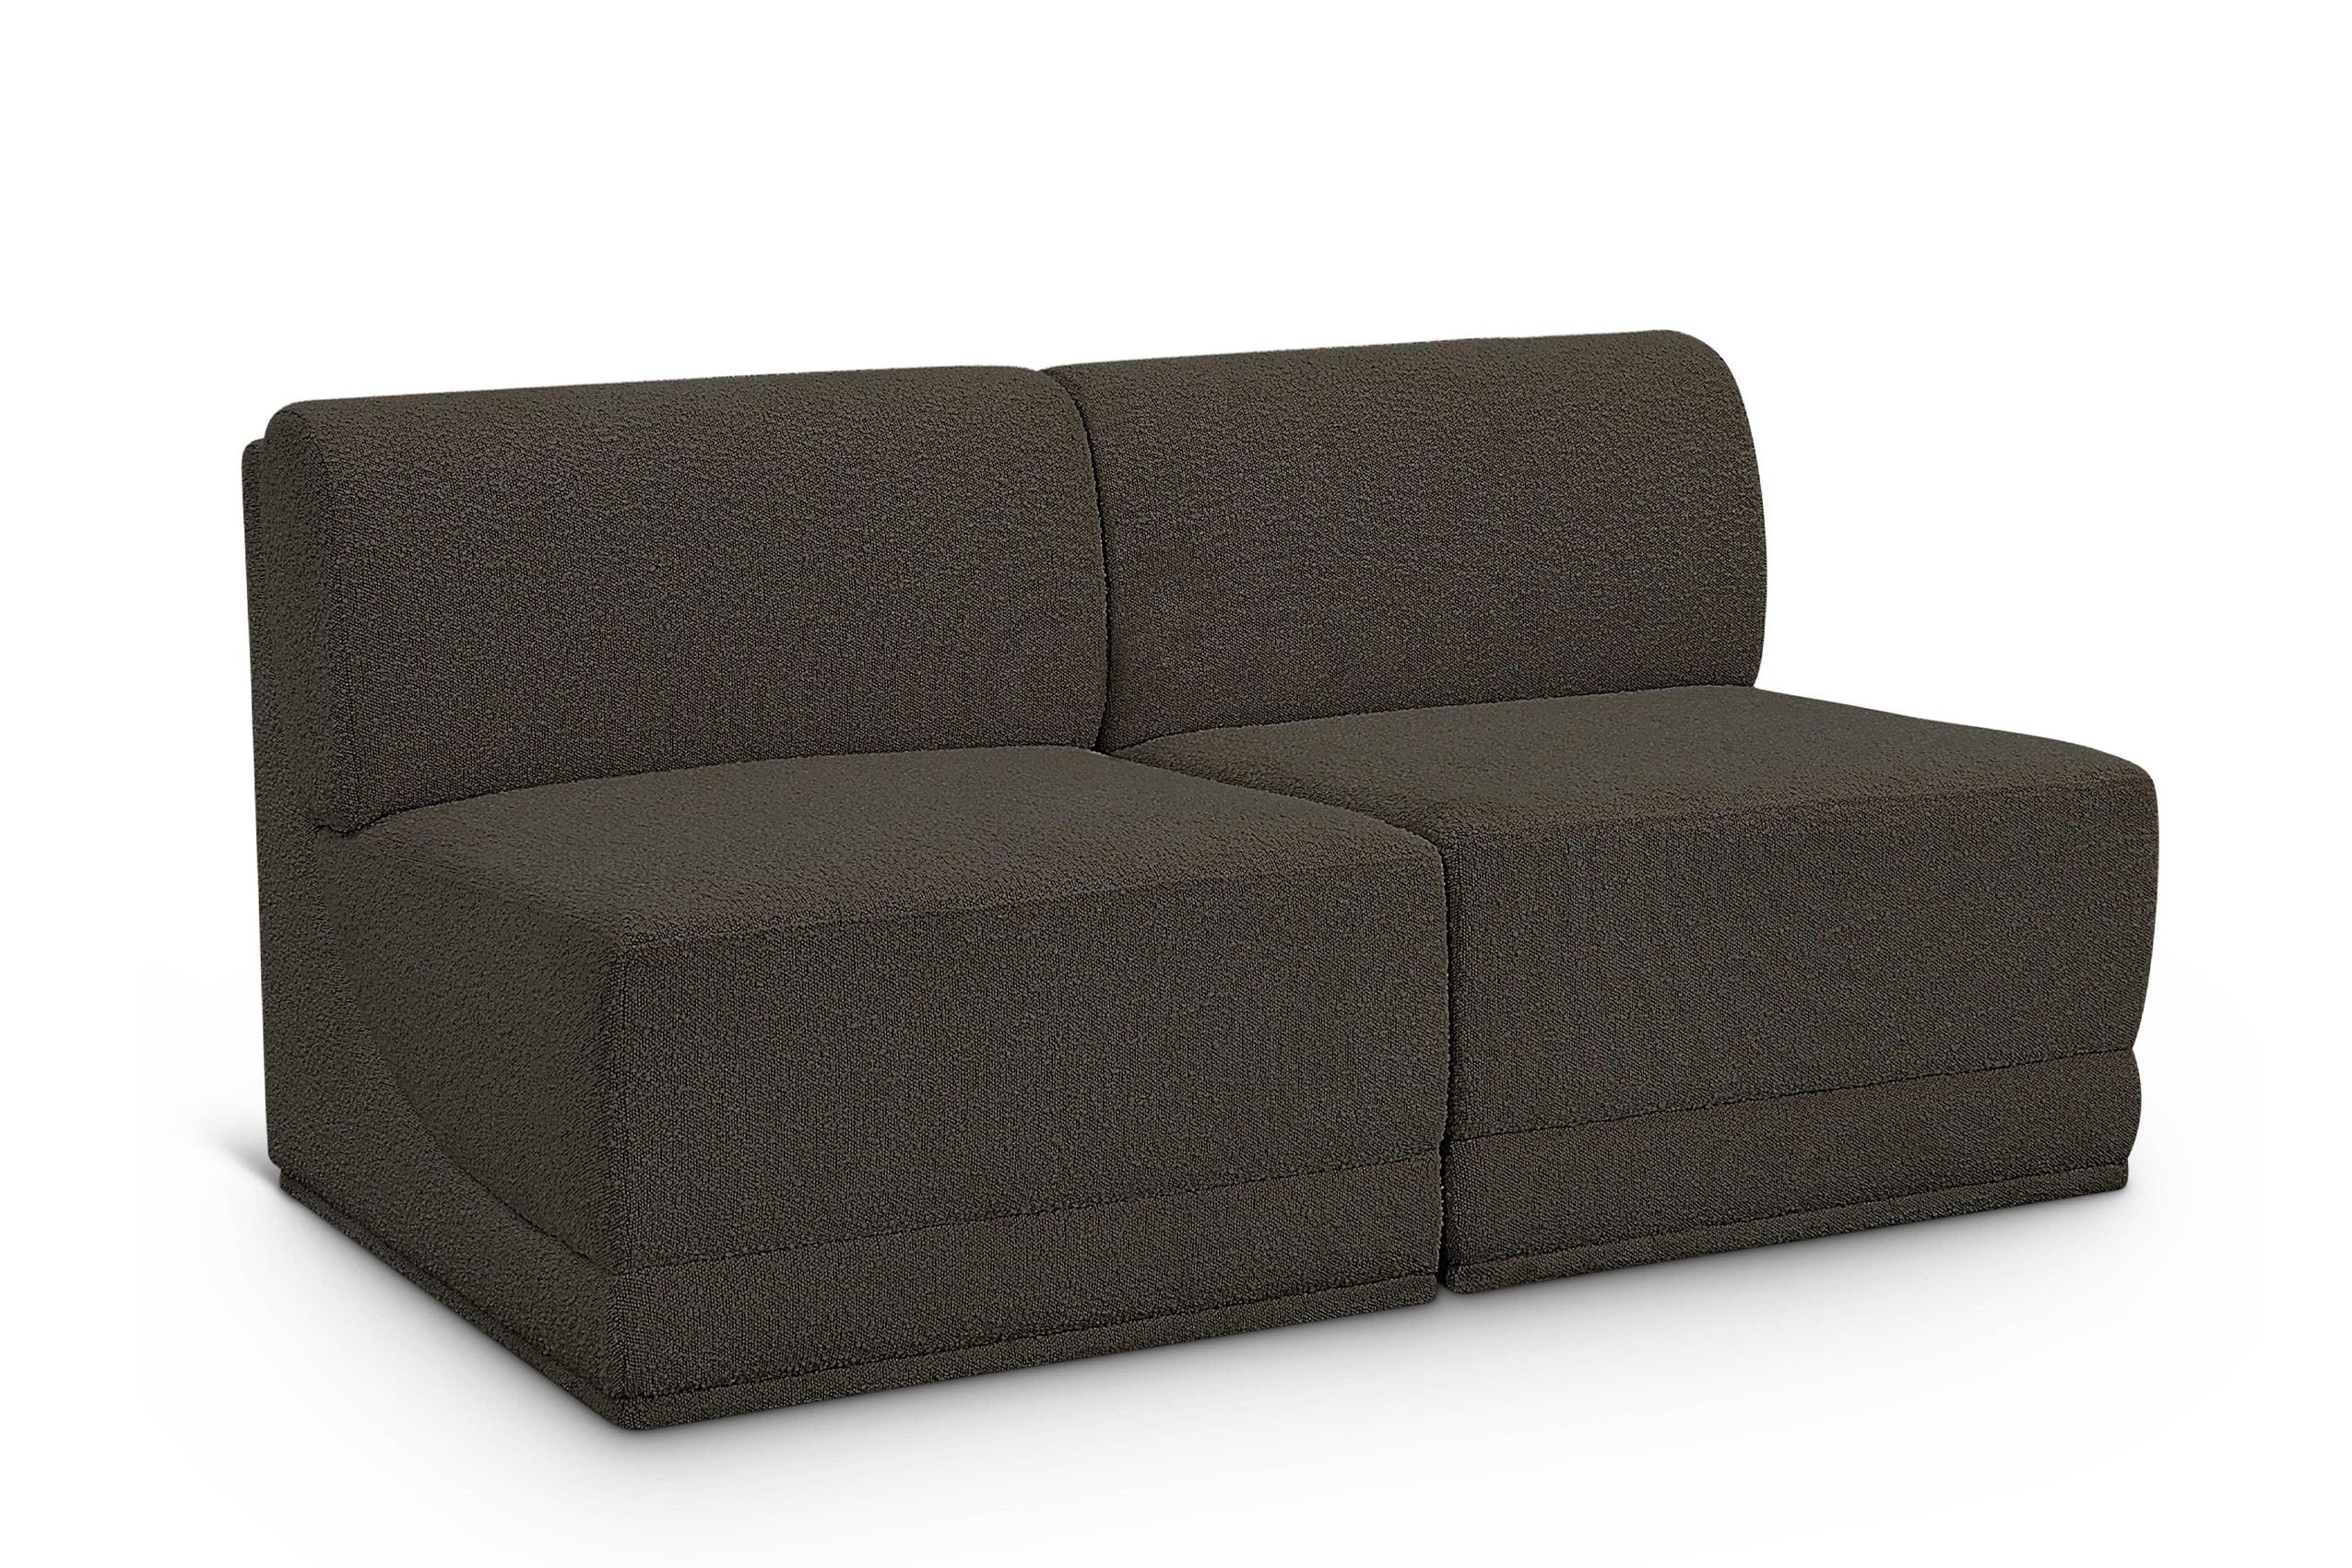 Contemporary, Modern Modular Sofa Ollie 118Brown-S60 118Brown-S60 in Brown 